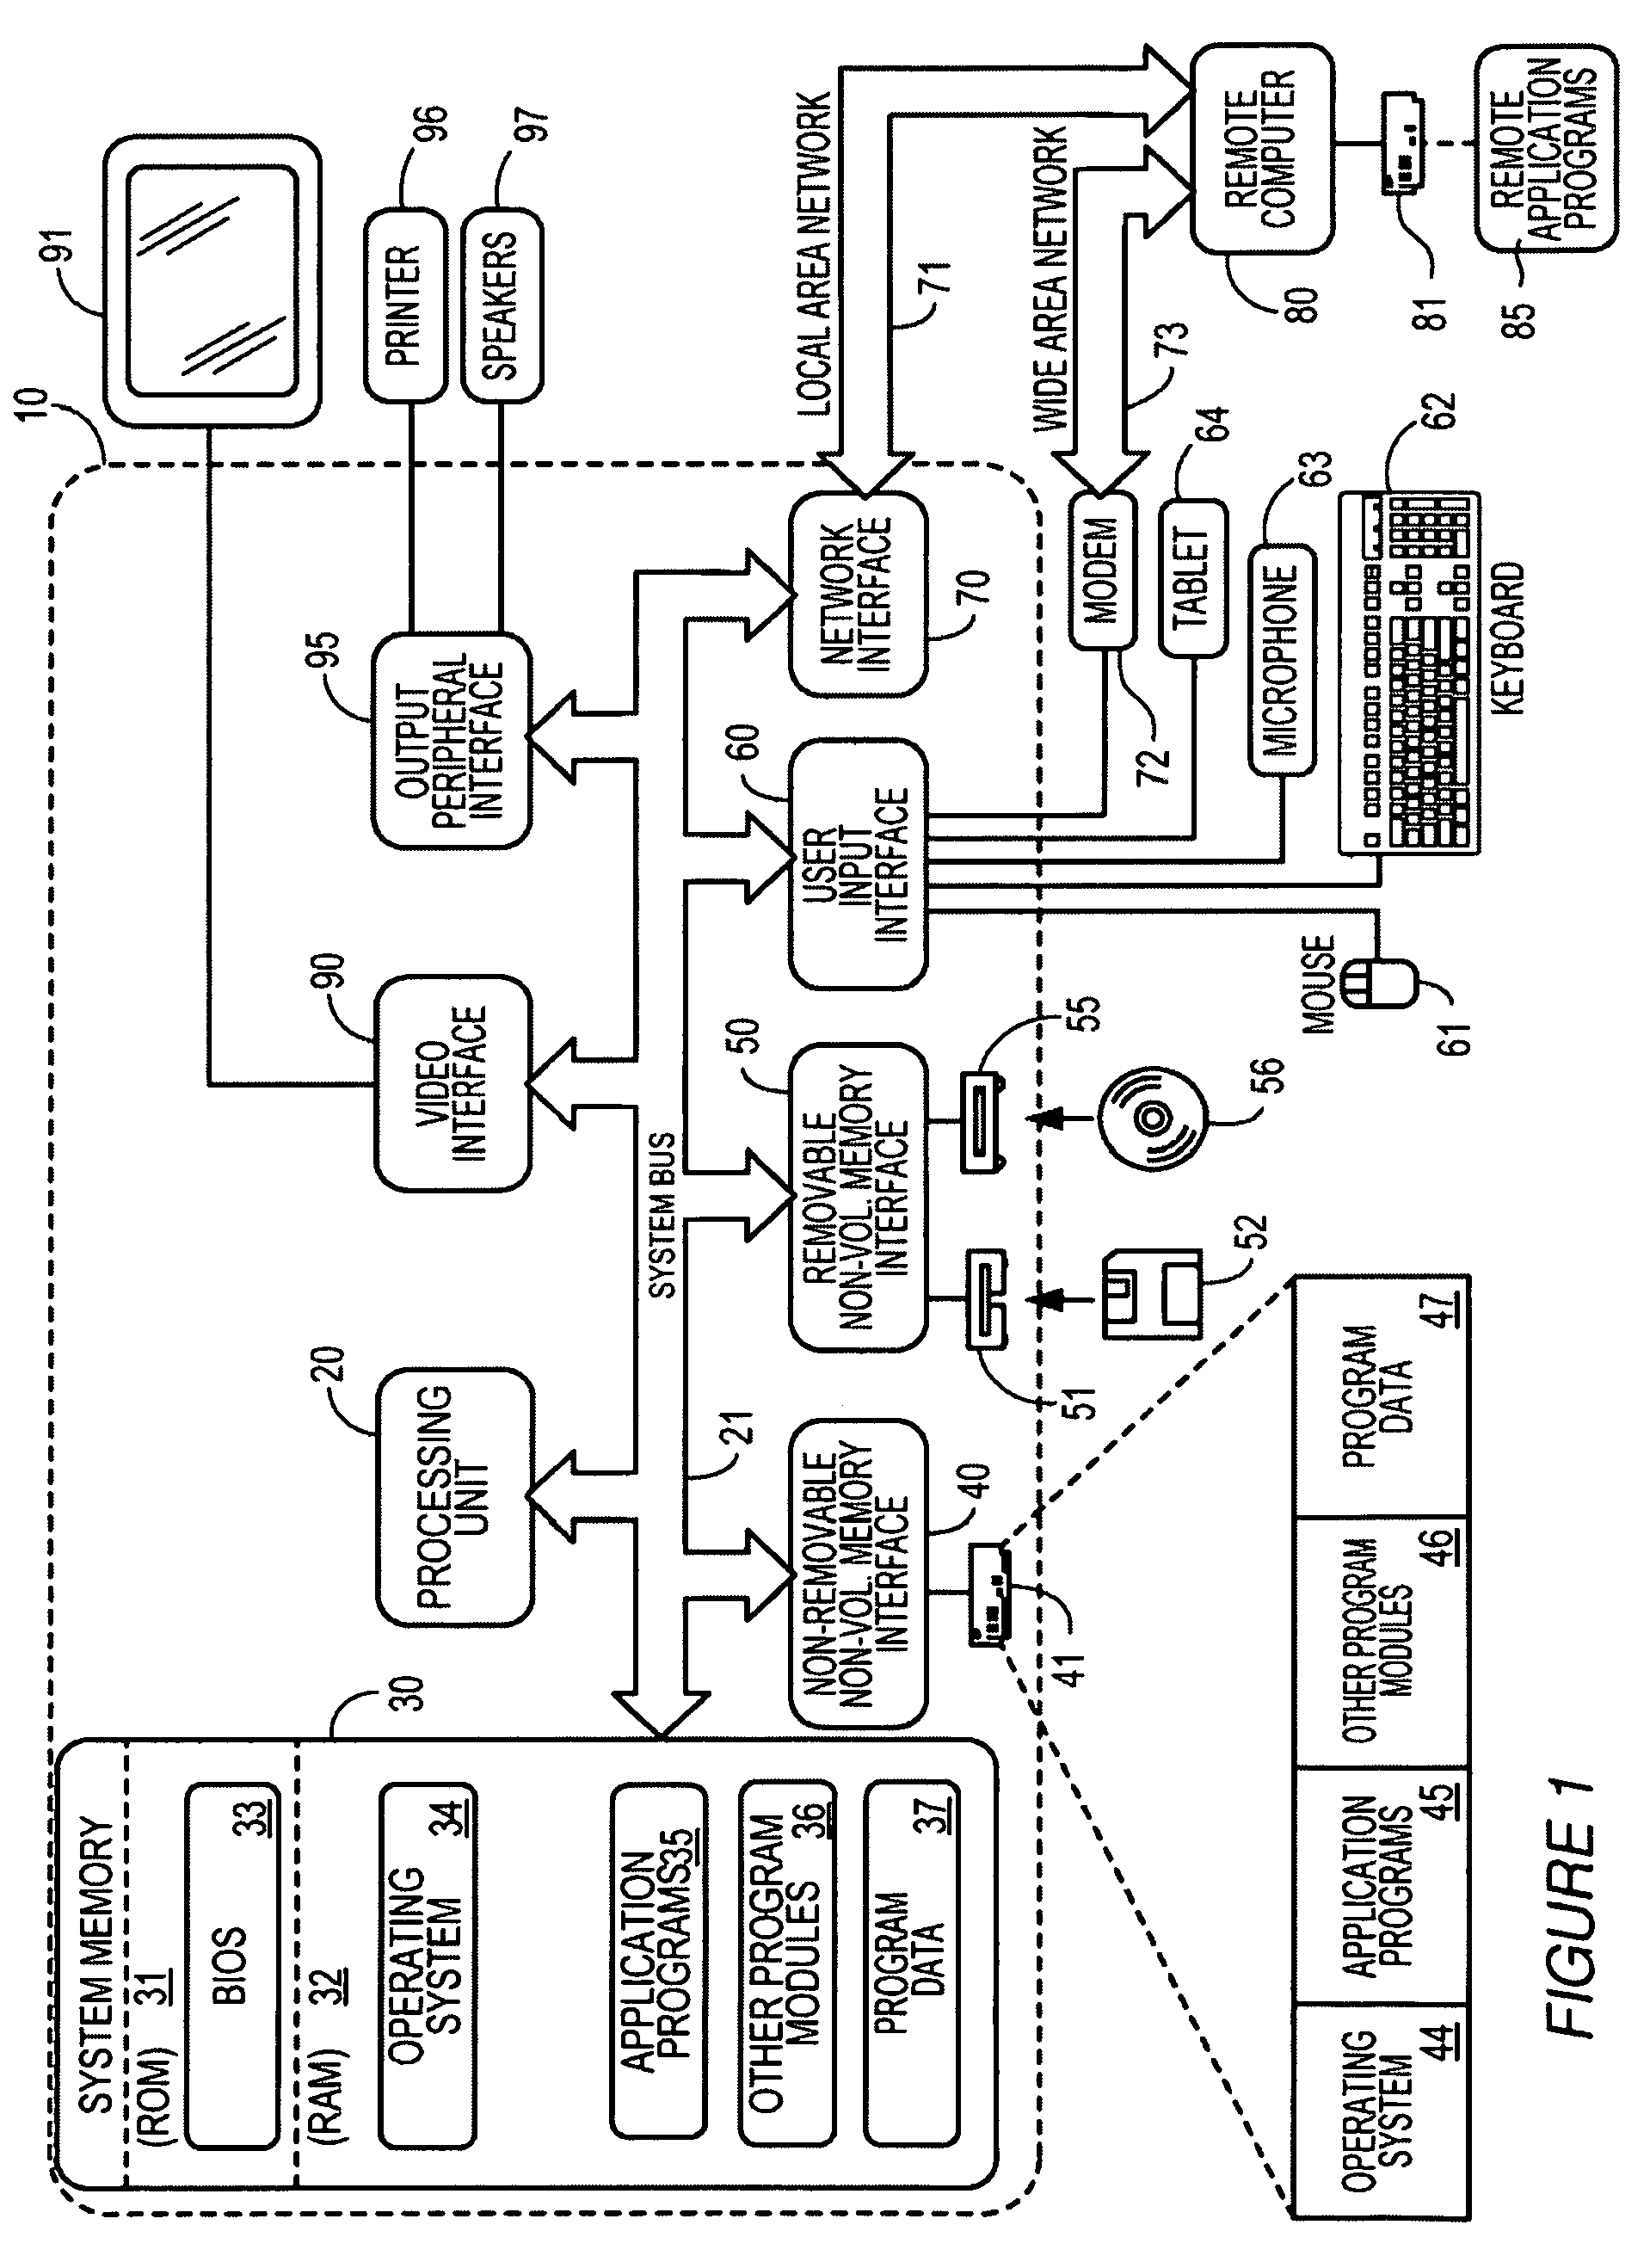 System and method for software delivery